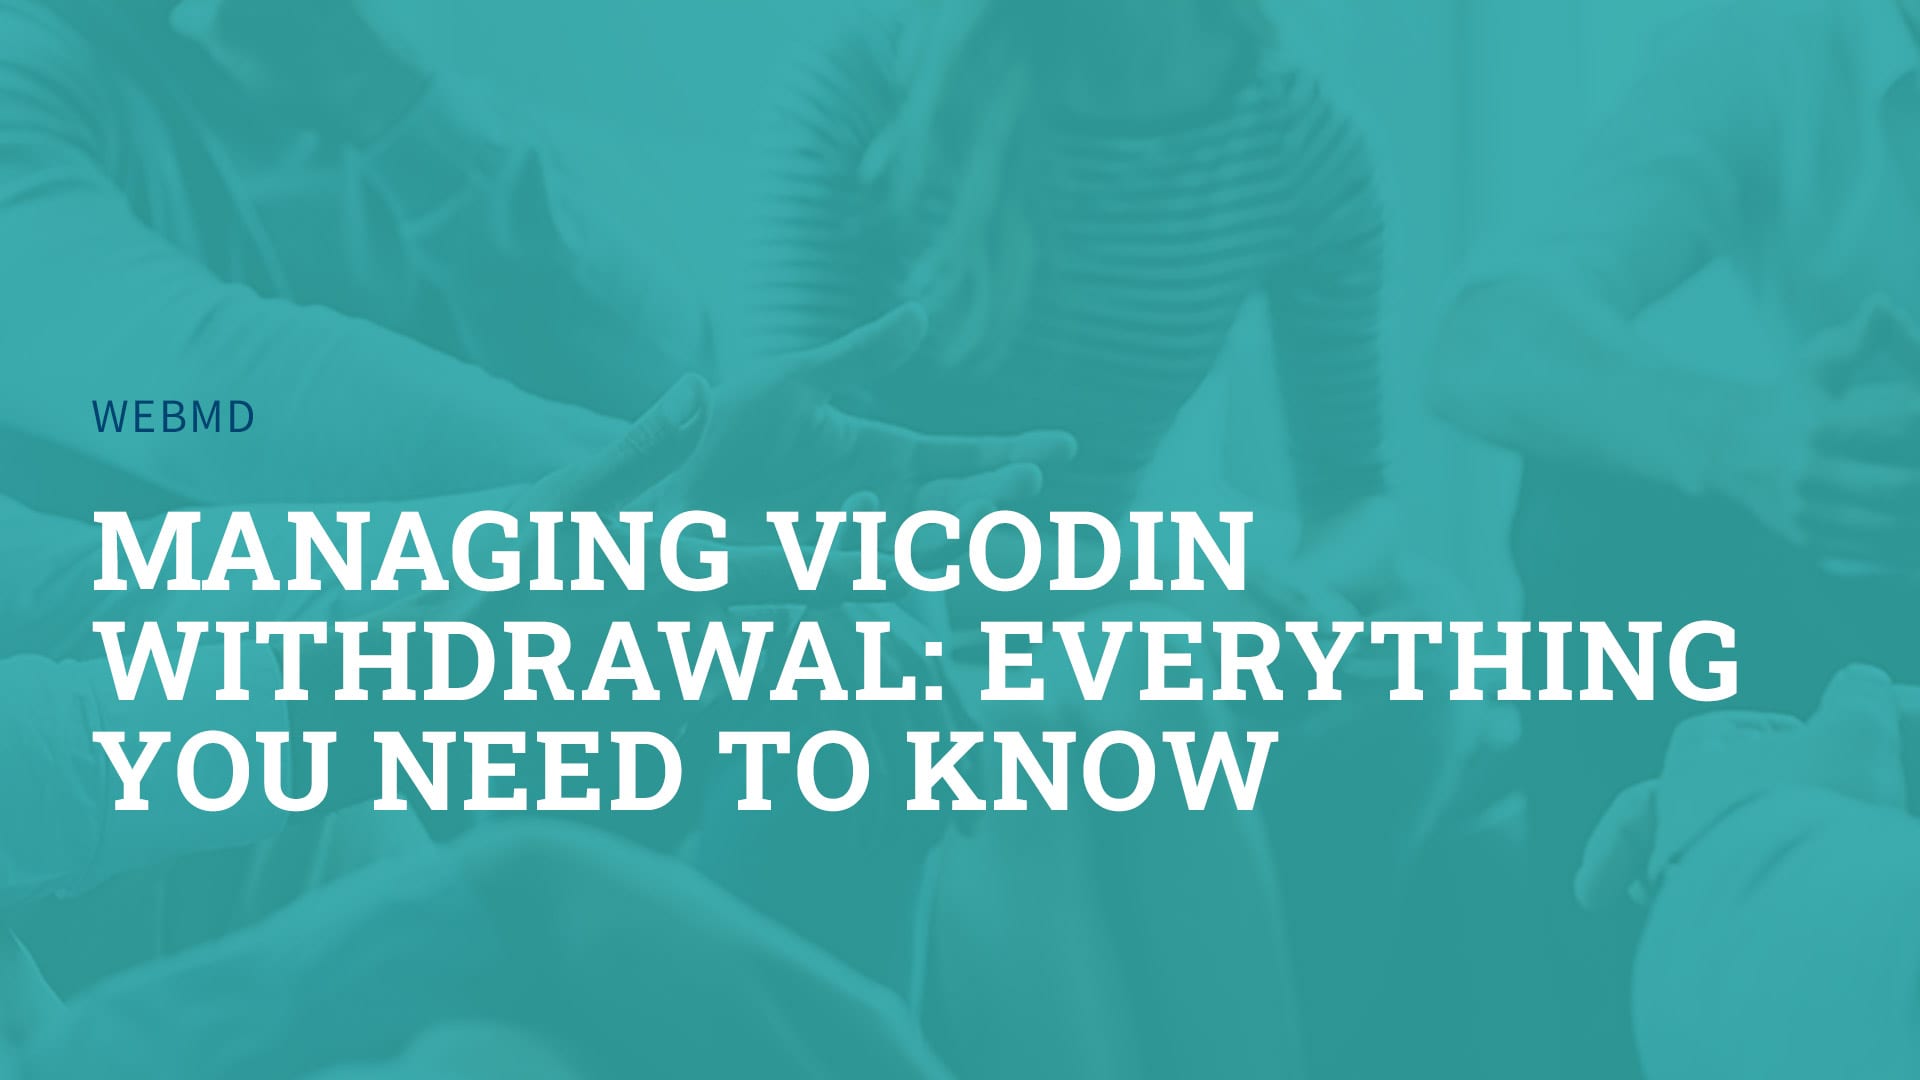 Managing Vicodin Withdrawal: Everything You Need to Know